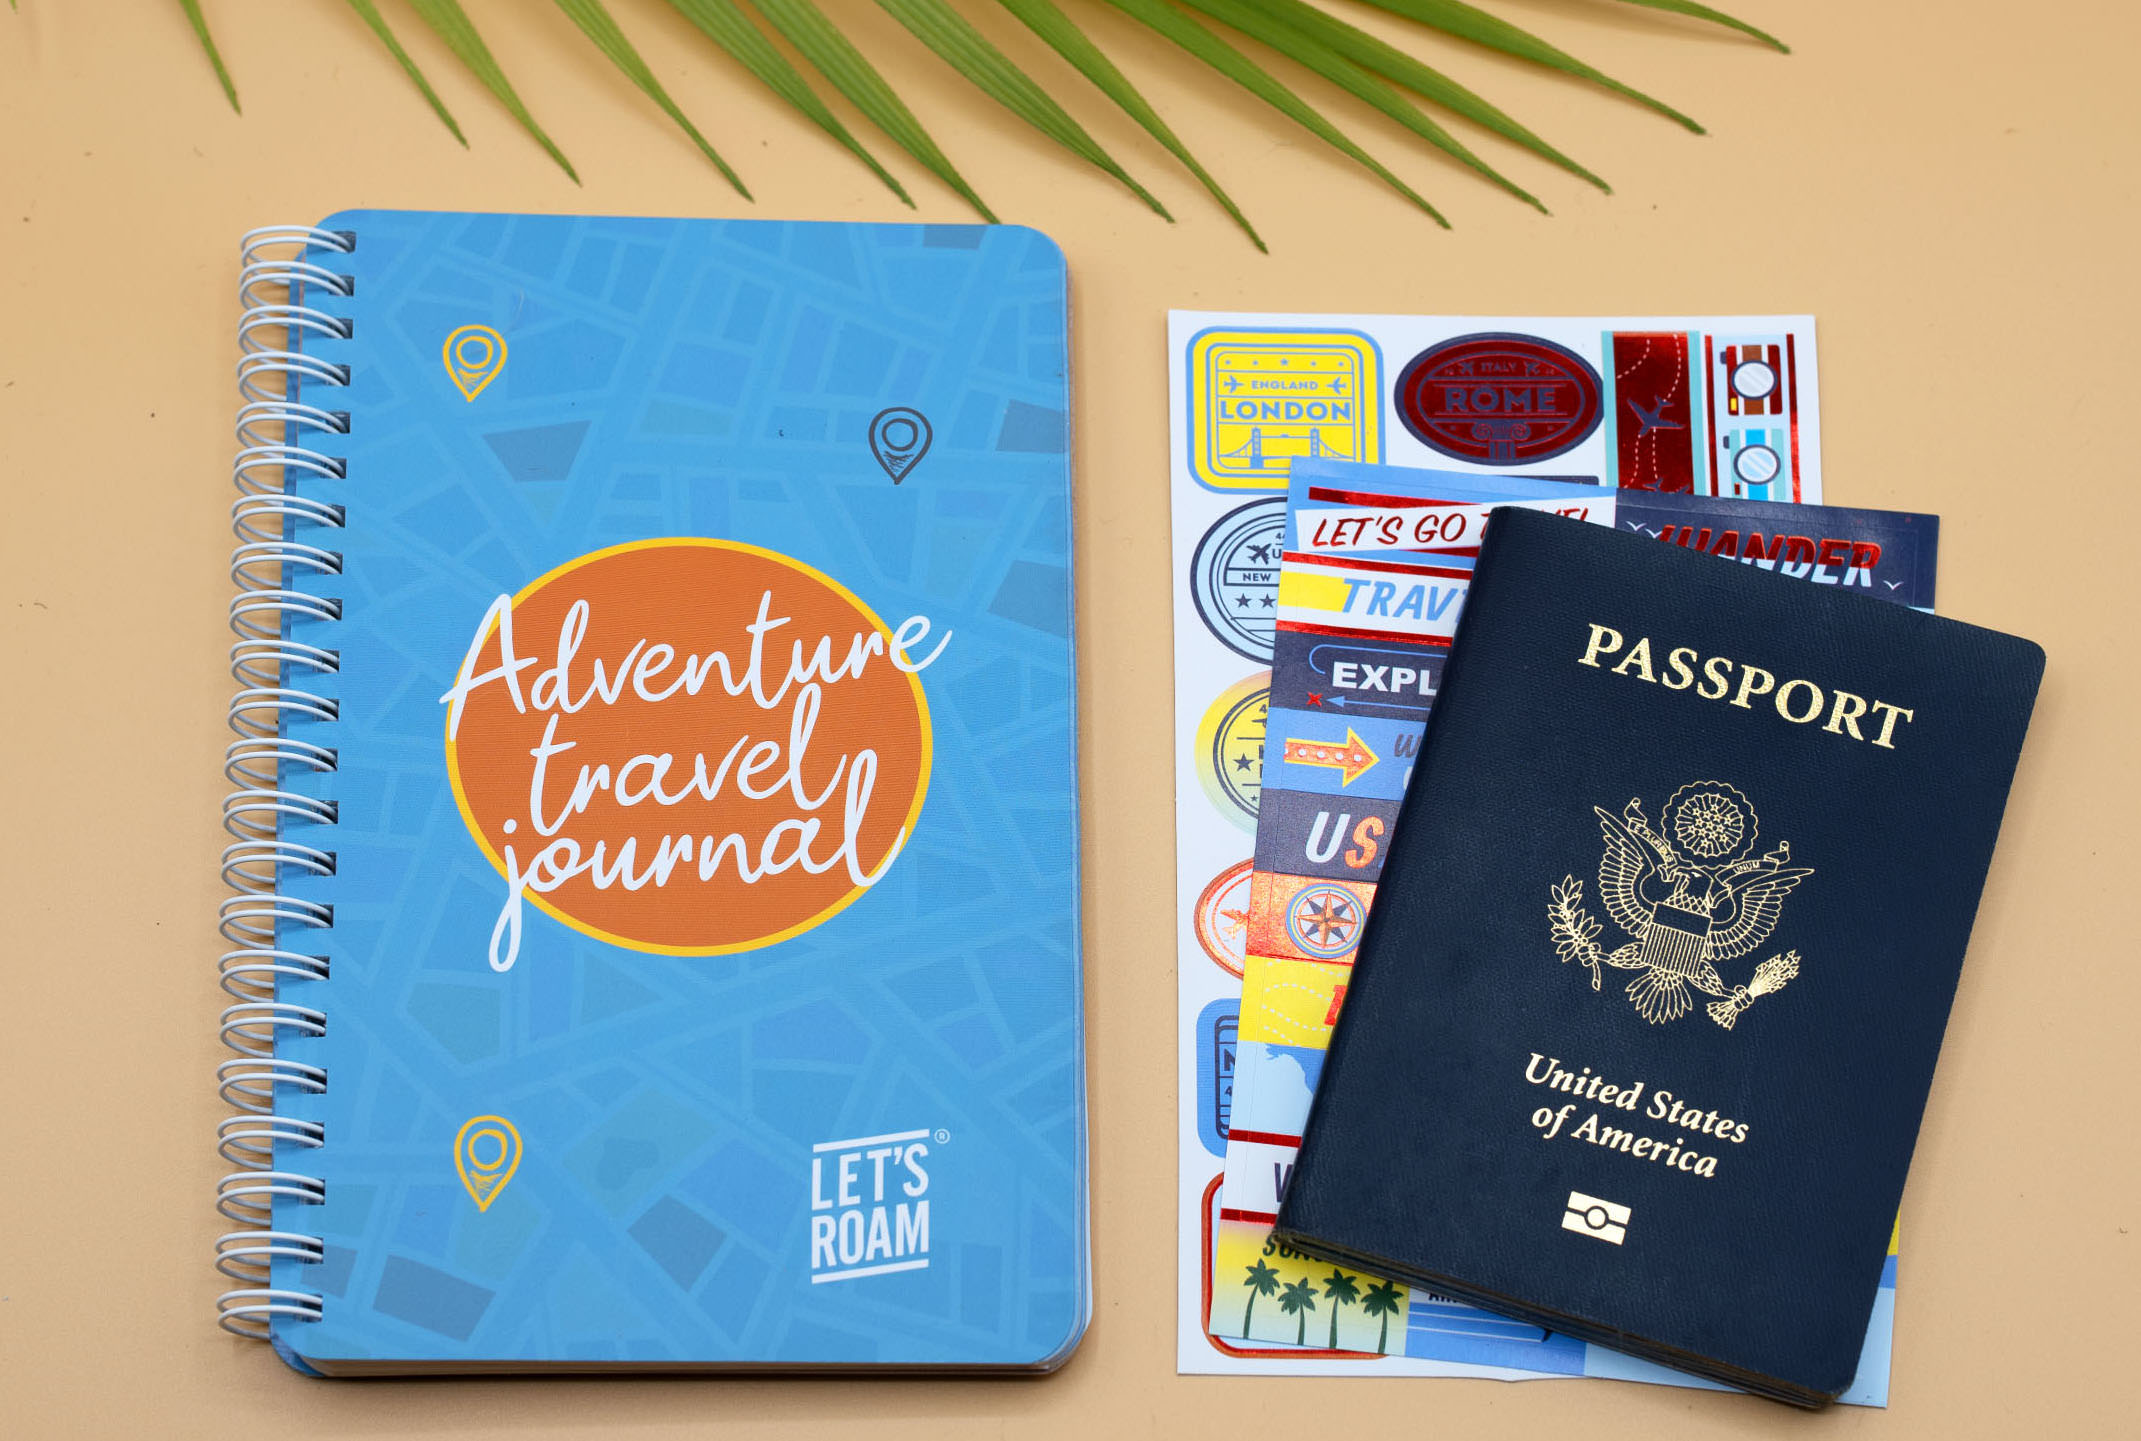 Travel Journal | 50 Scratch-Off Travel Activities | Perfect Gift for Travelers | The Adventure Challenge - Travel Edition